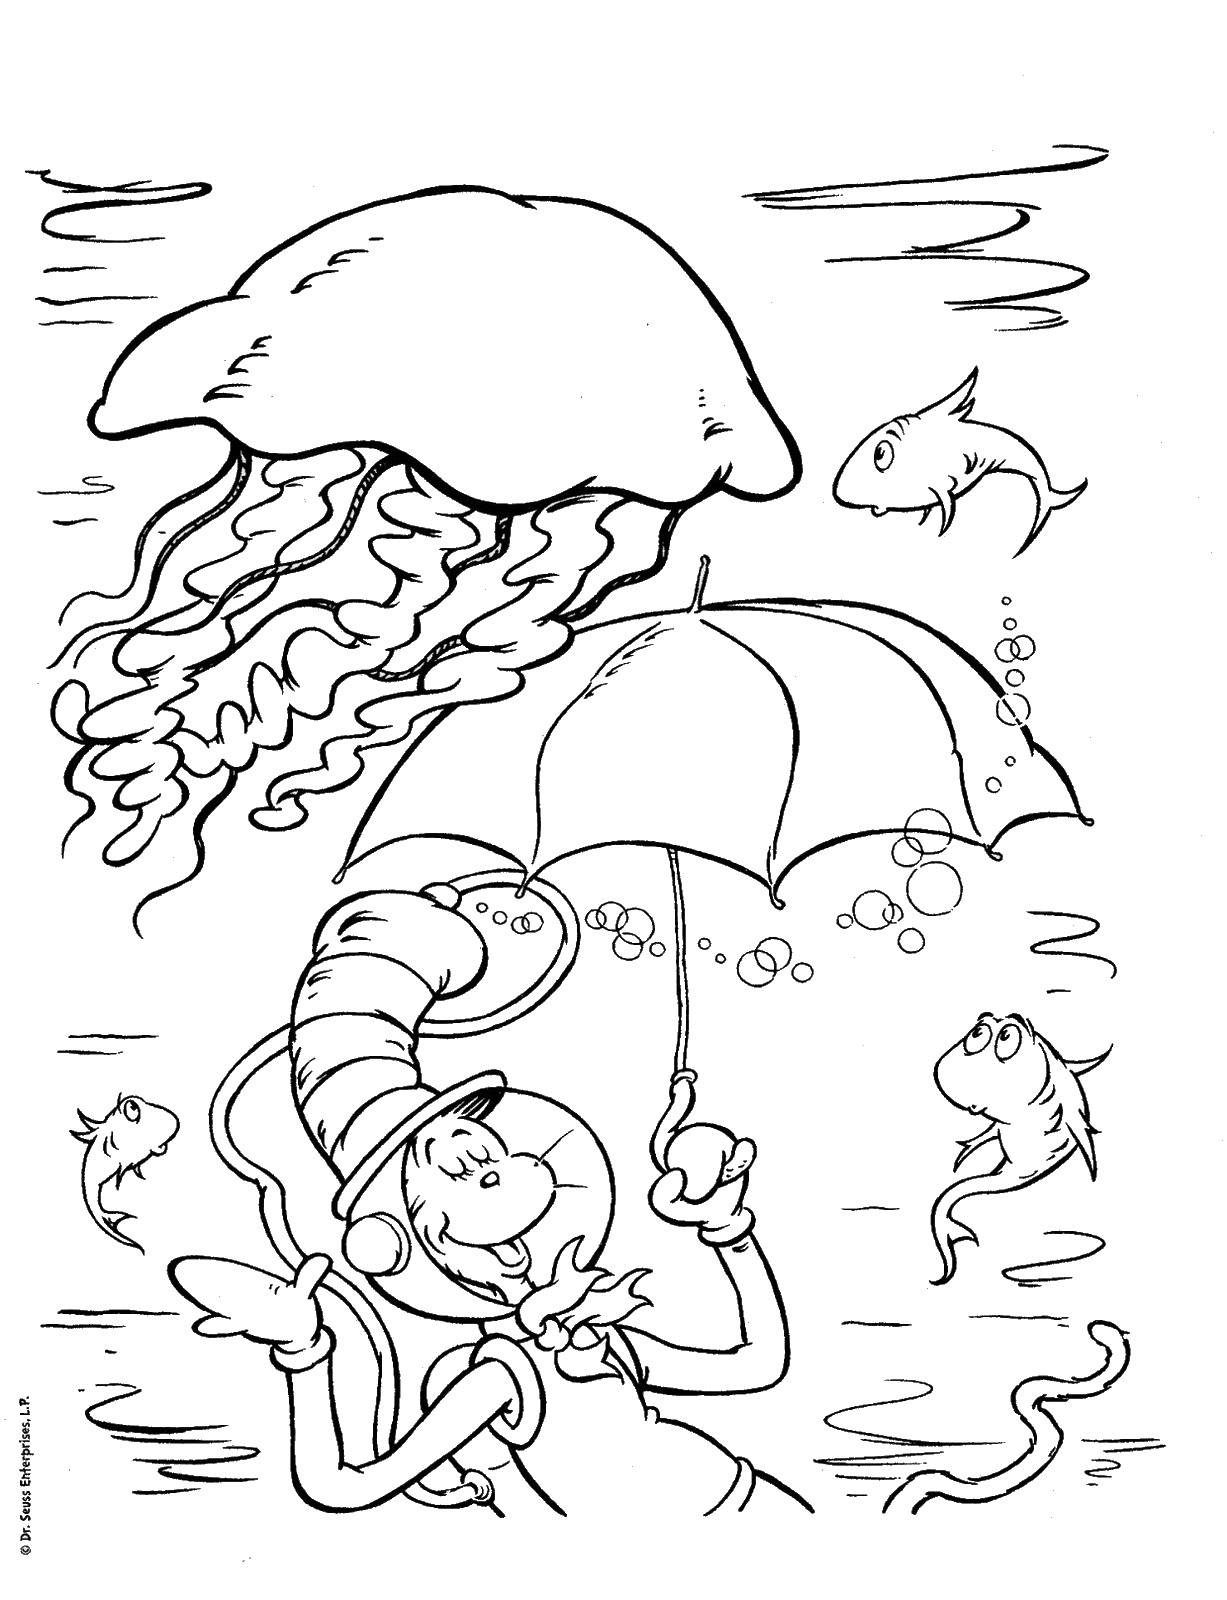 Download Cat in the Hat Coloring Pages